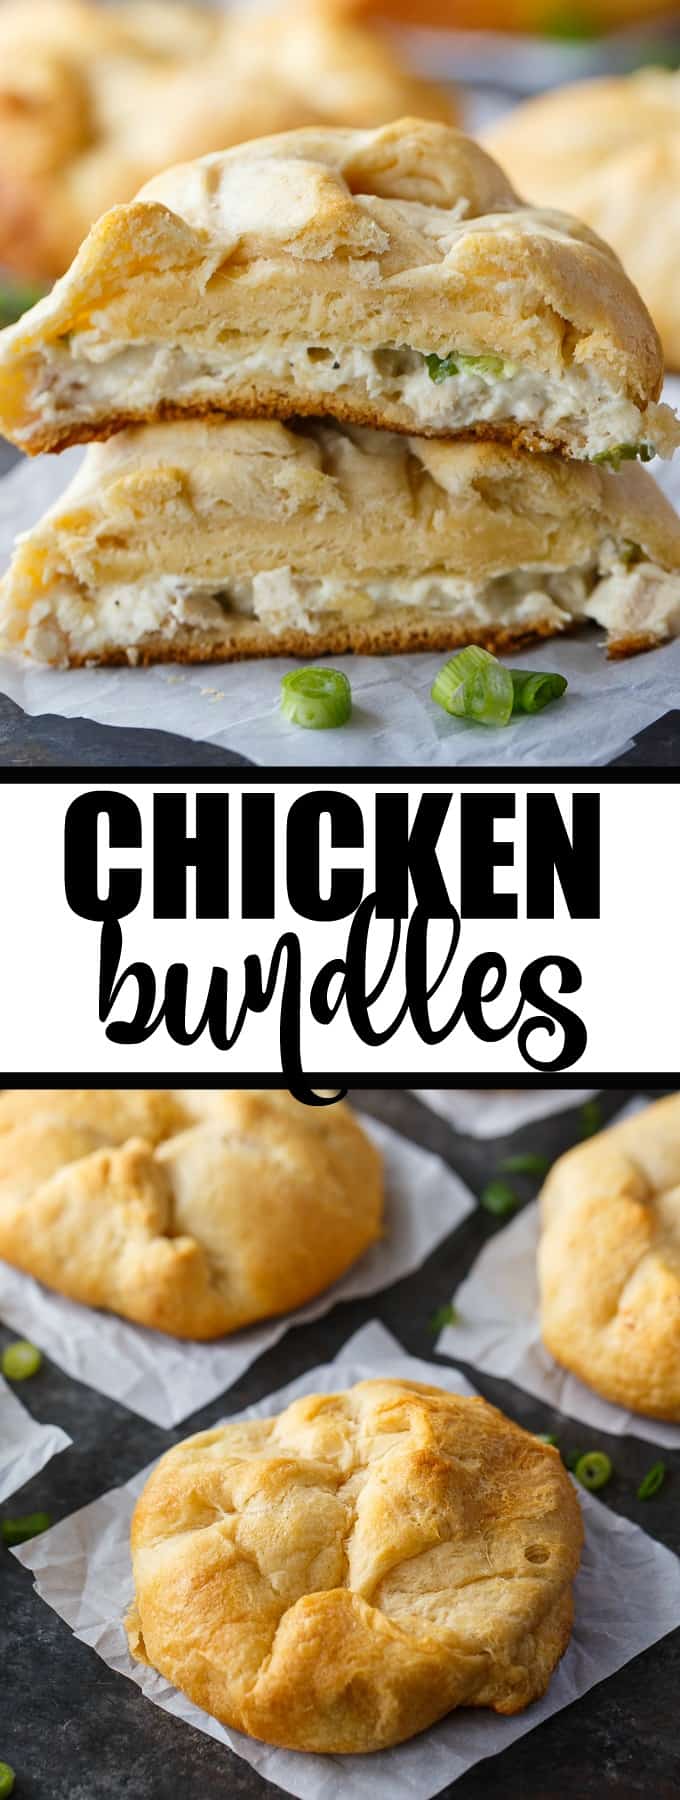 Chicken Bundles - Kids LOVE this easy treat! Creamy chicken salad is surrounded by a flaky golden dough pocket. Perfect for leftover chicken!